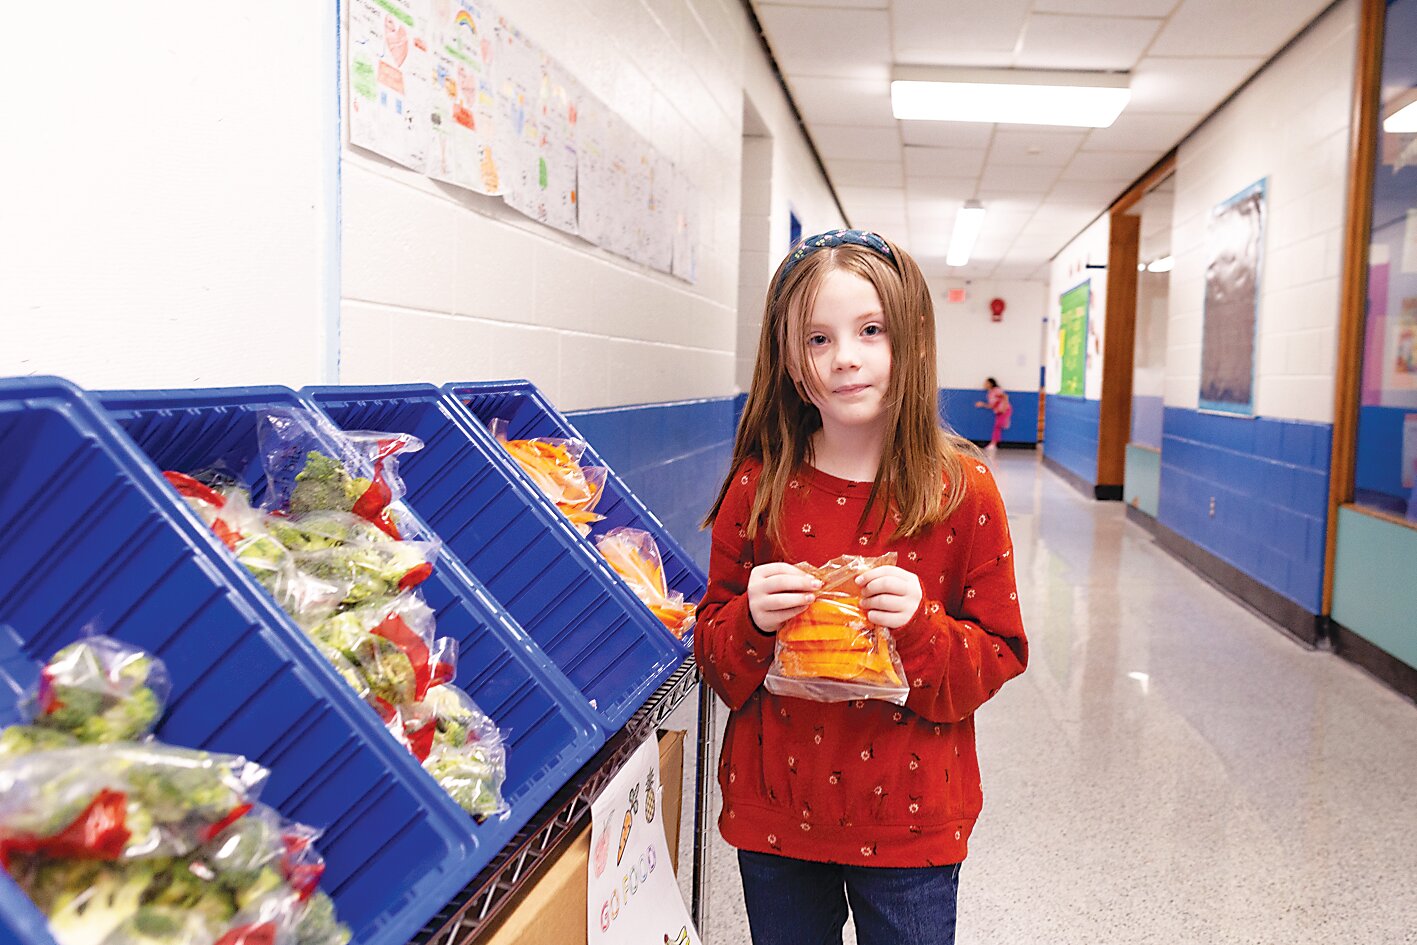 Thanks to a grant, the school now has healthy snack carts placed throughout the premises. Students can easily access nutritious options like carrot sticks and broccoli bags.